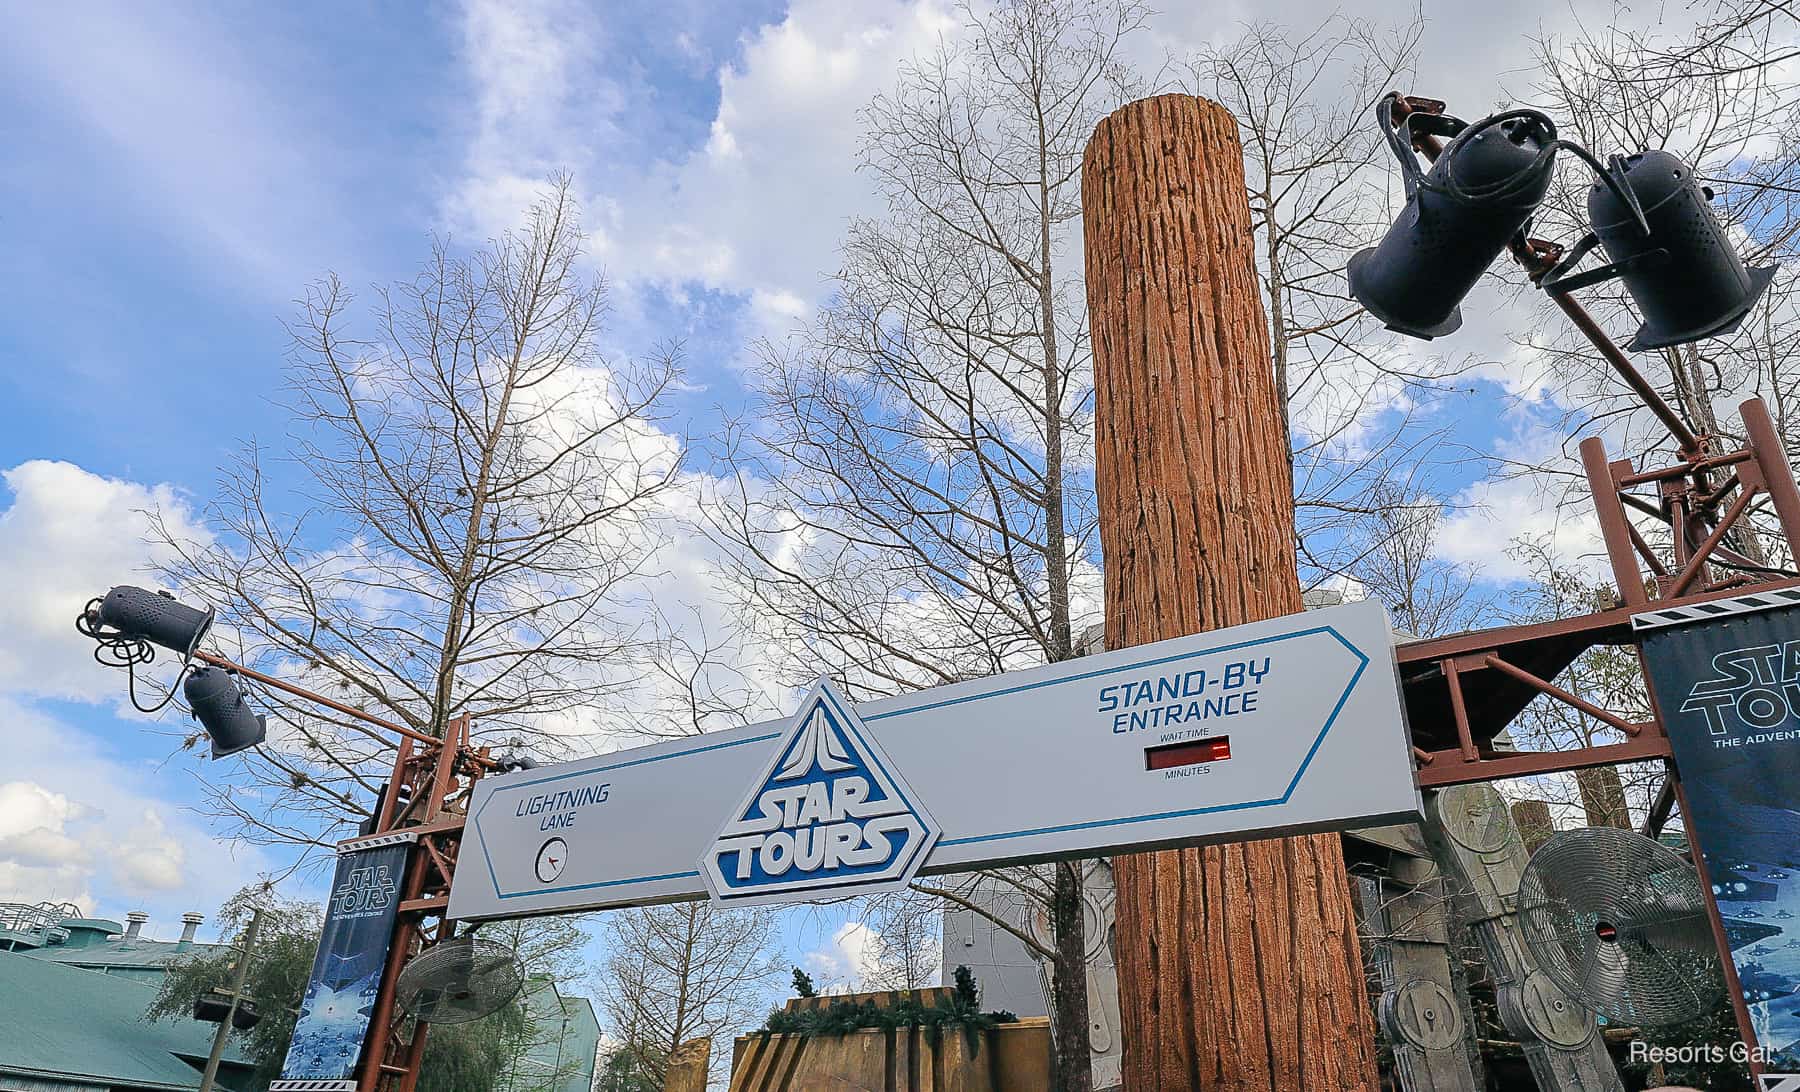 Star Tours Entrance with Stand-by and Lightning Lanes 